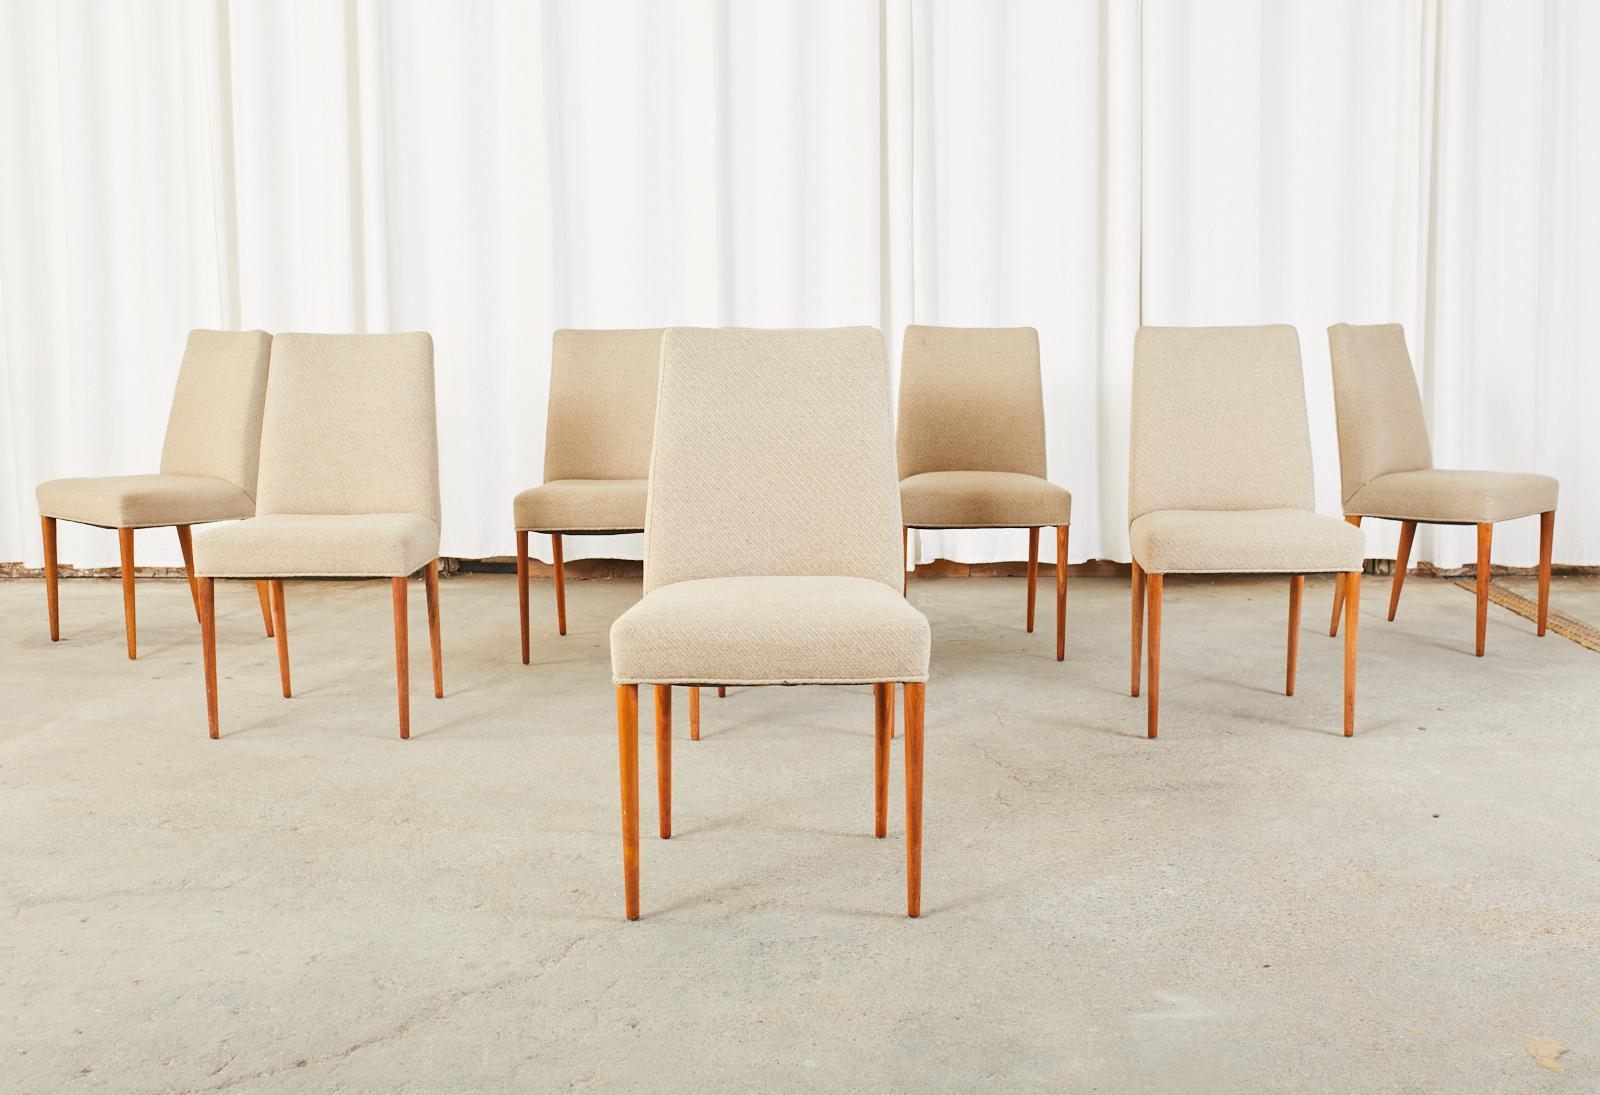 Sleek set of eight Scandinavian modern style dining chairs featuring a hardwood frame. The chairs have a lovely profile with a wool fabric upholstery. Supported by rounded, tapered legs with excellent joinery and craftsmanship. From an estate in San